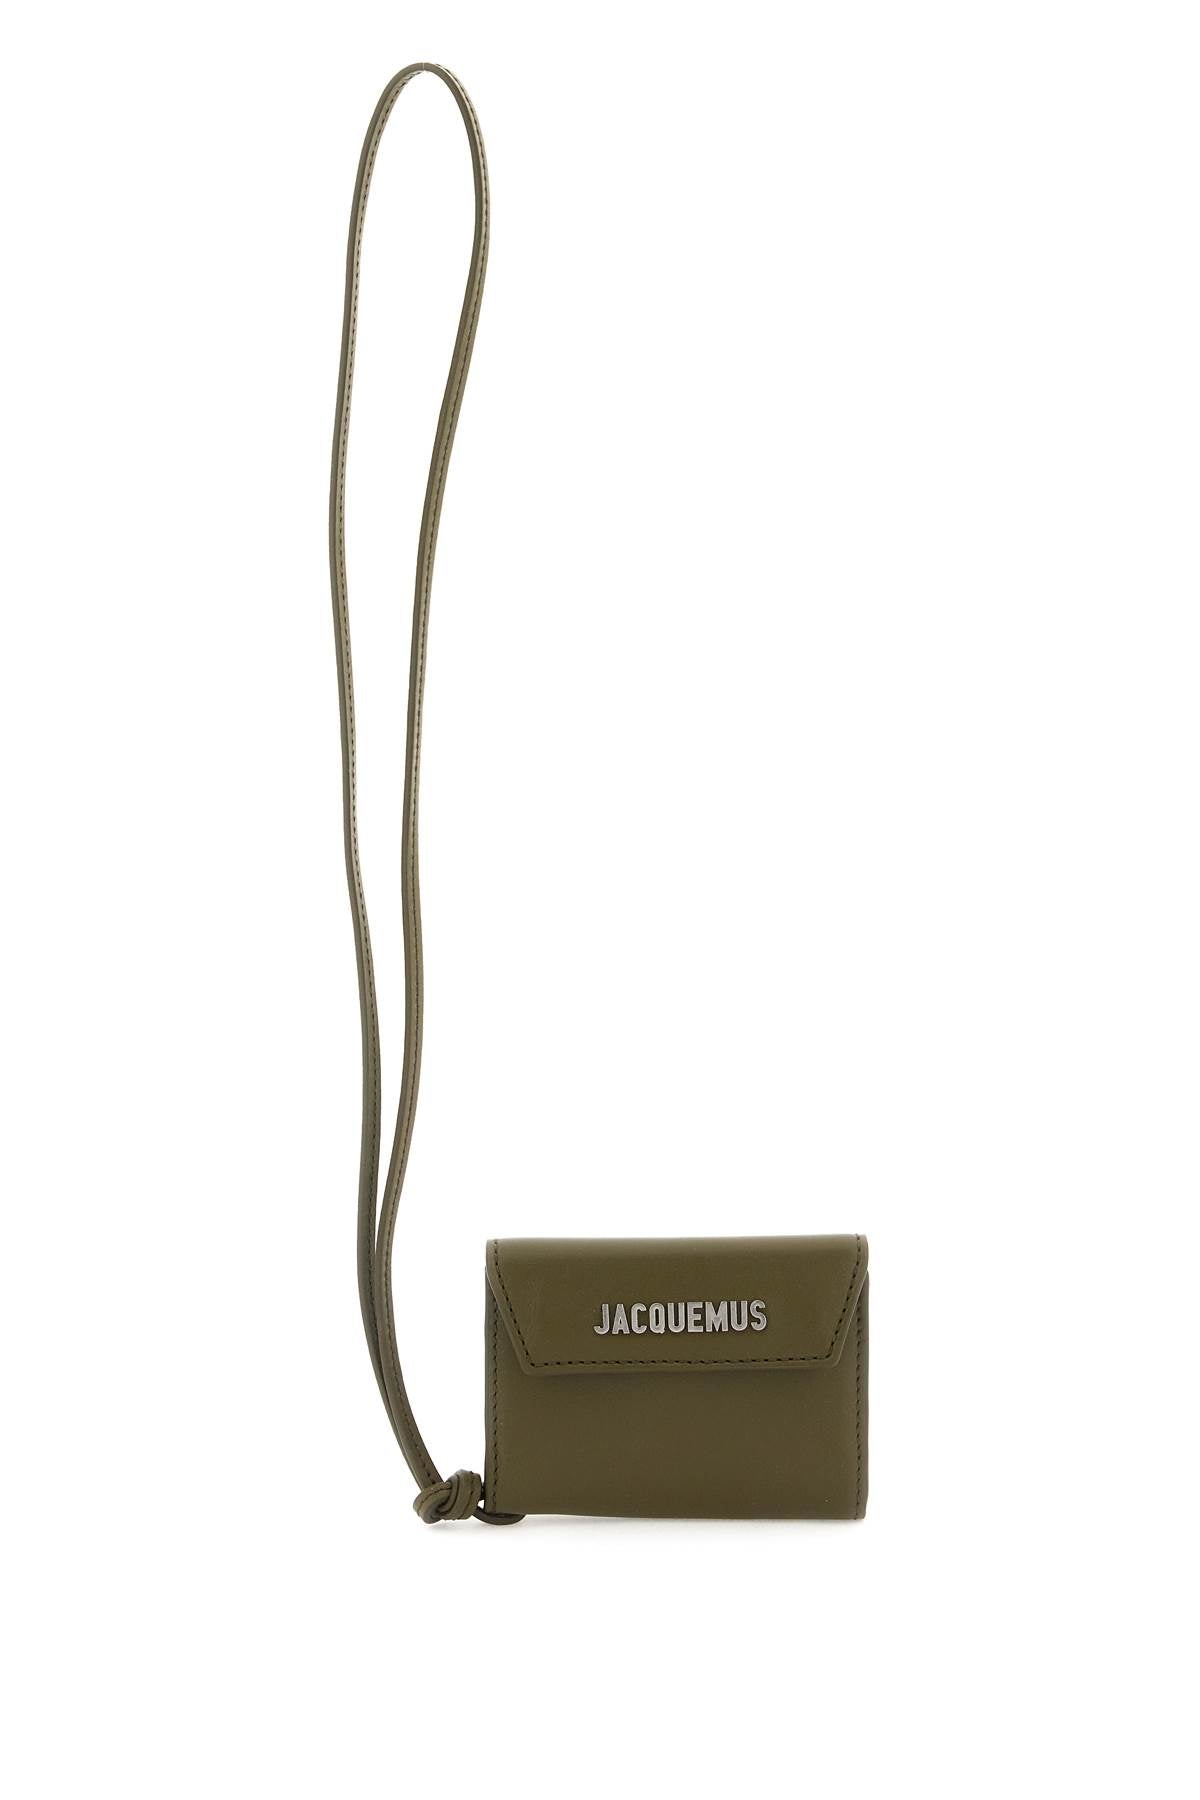 Jacquemus 'le Port Azur' Card Holder With Strap In Black